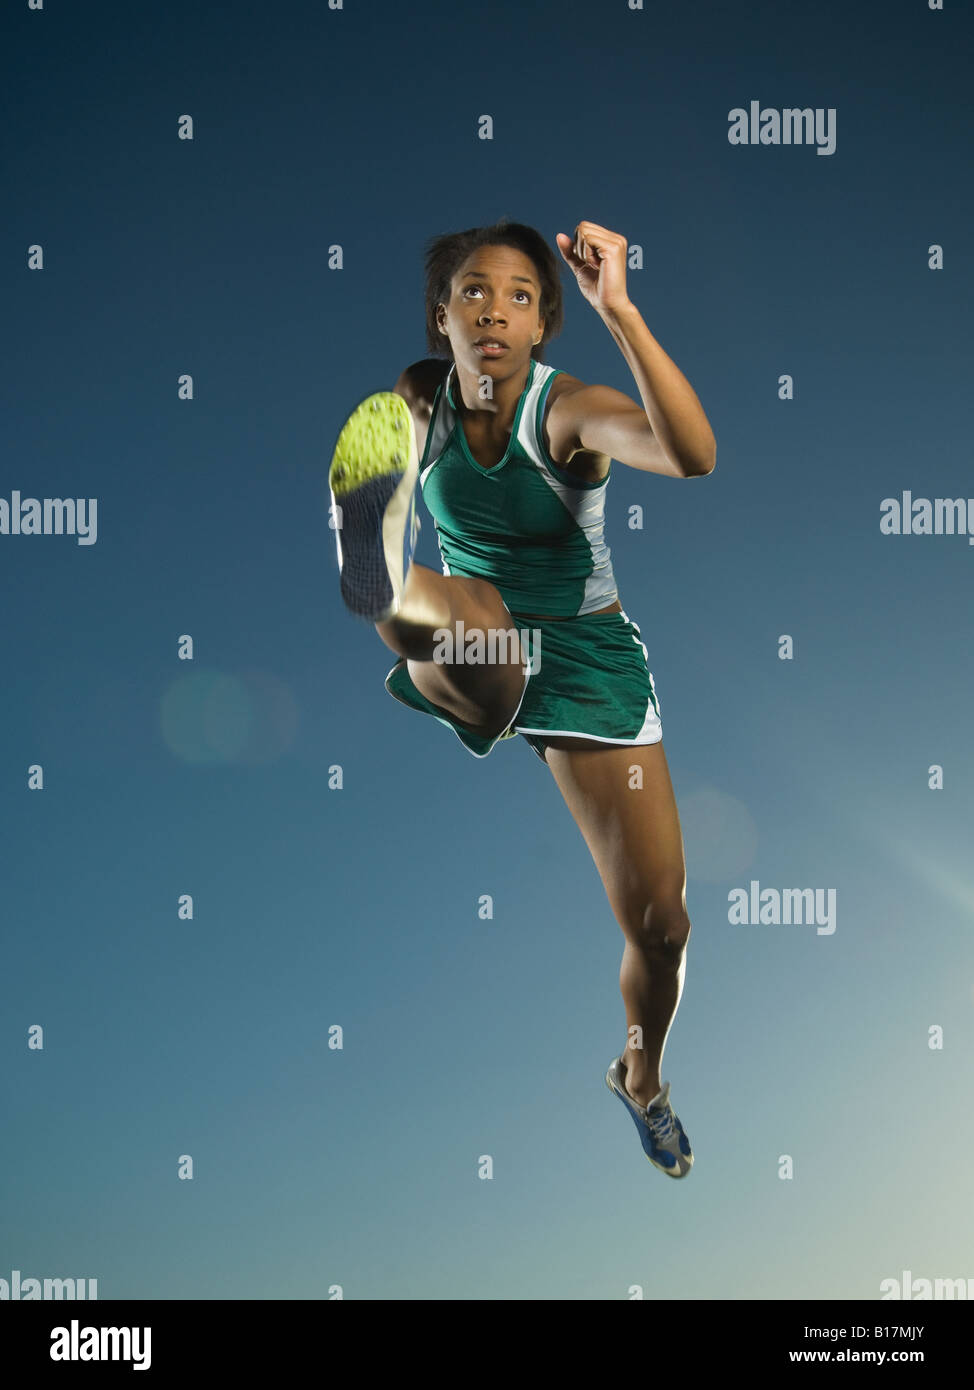 African American female athlete jumping Stock Photo